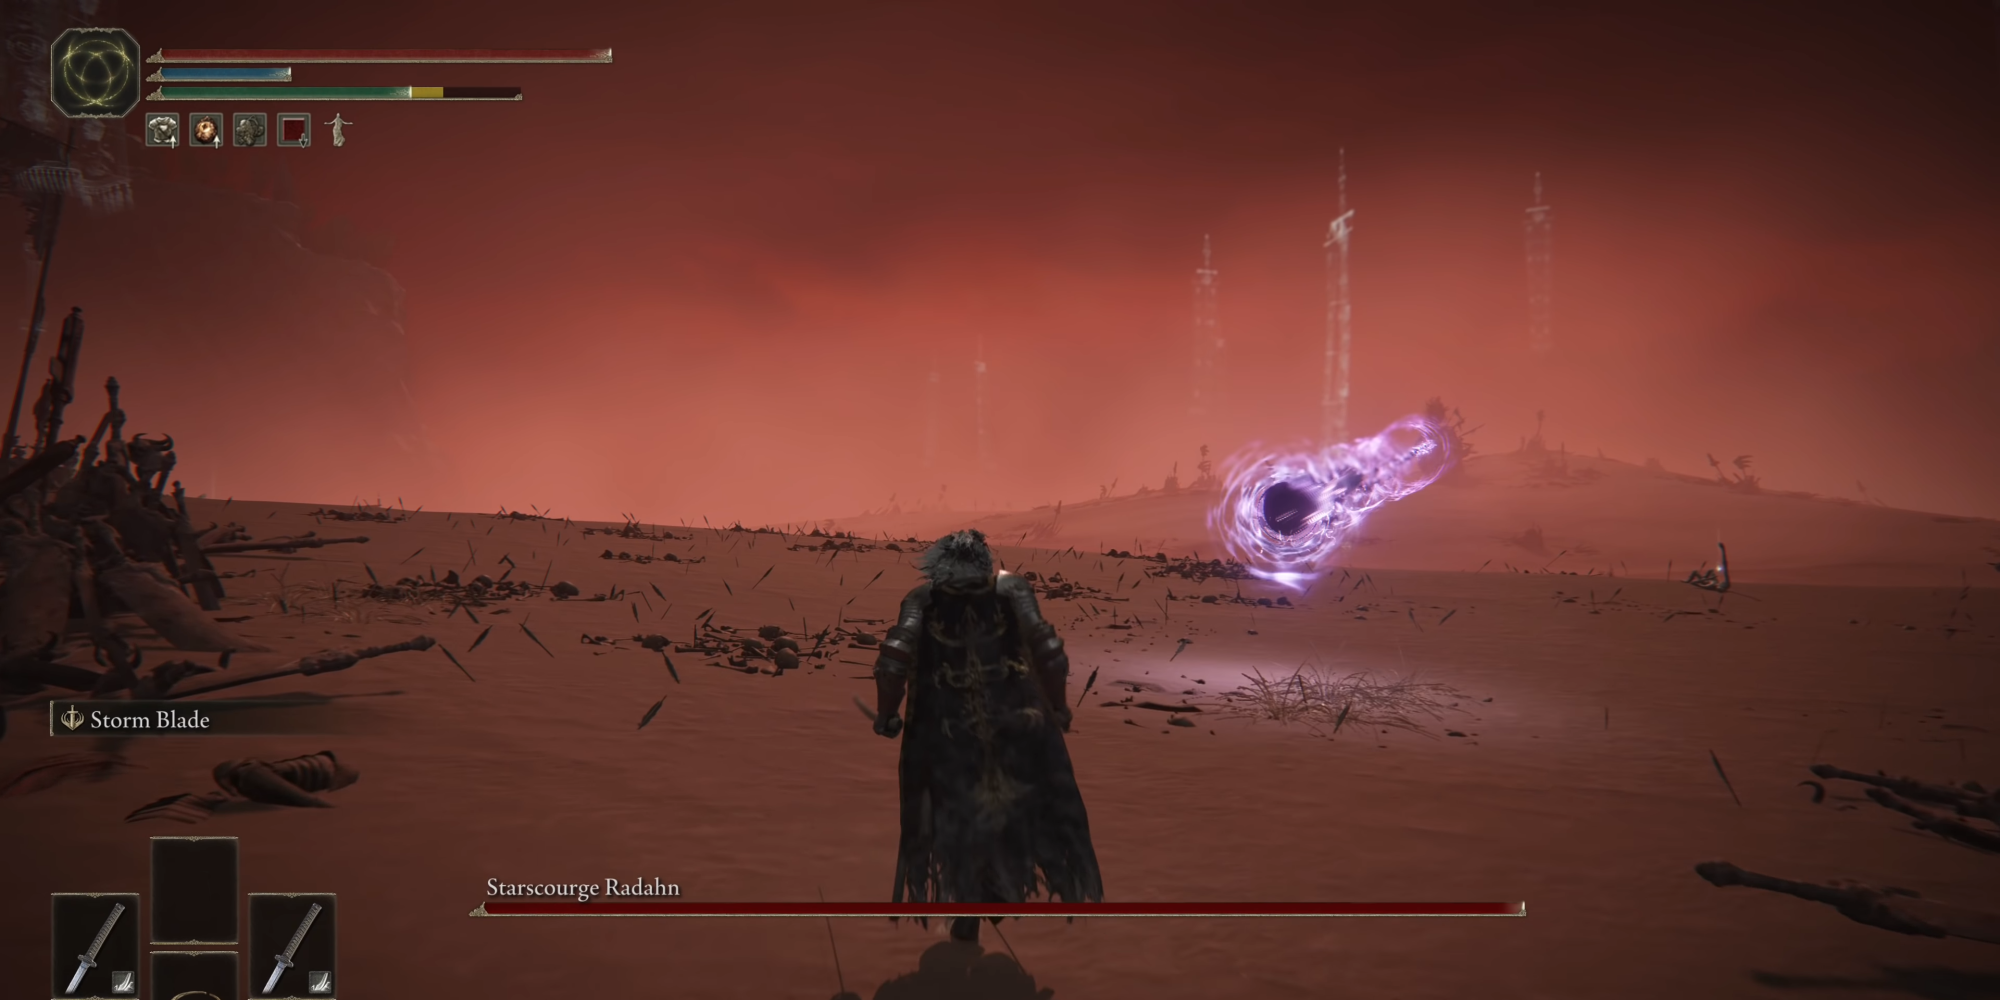 This image shows Starscourge Radahn's homing arrow attack in Elden Ring